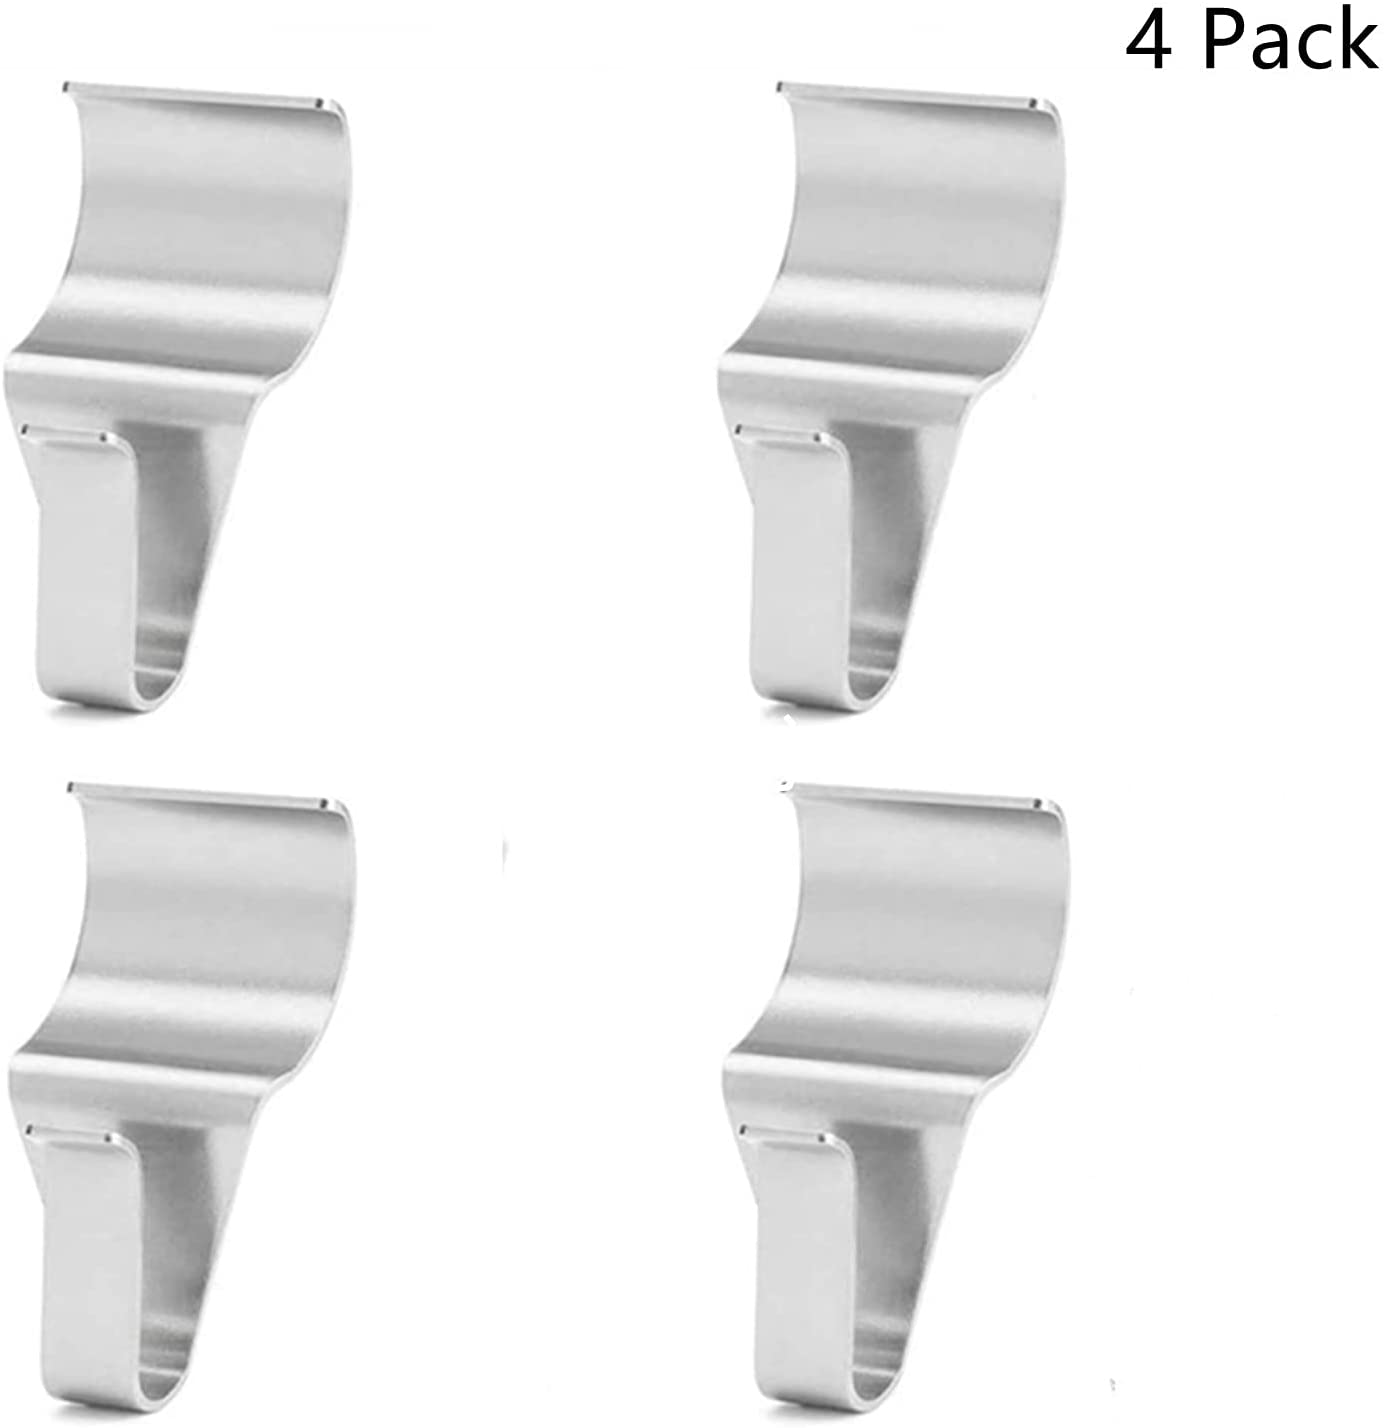 PILLYBALLA Vinyl Siding Hooks for Hanging, Heavy Duty Outdoor Decorations Siding Hanger, Stainless Steel Vinyl Siding Clips Low Profile No-Hole Hanger Hooks(4Pack) - image 3 of 7